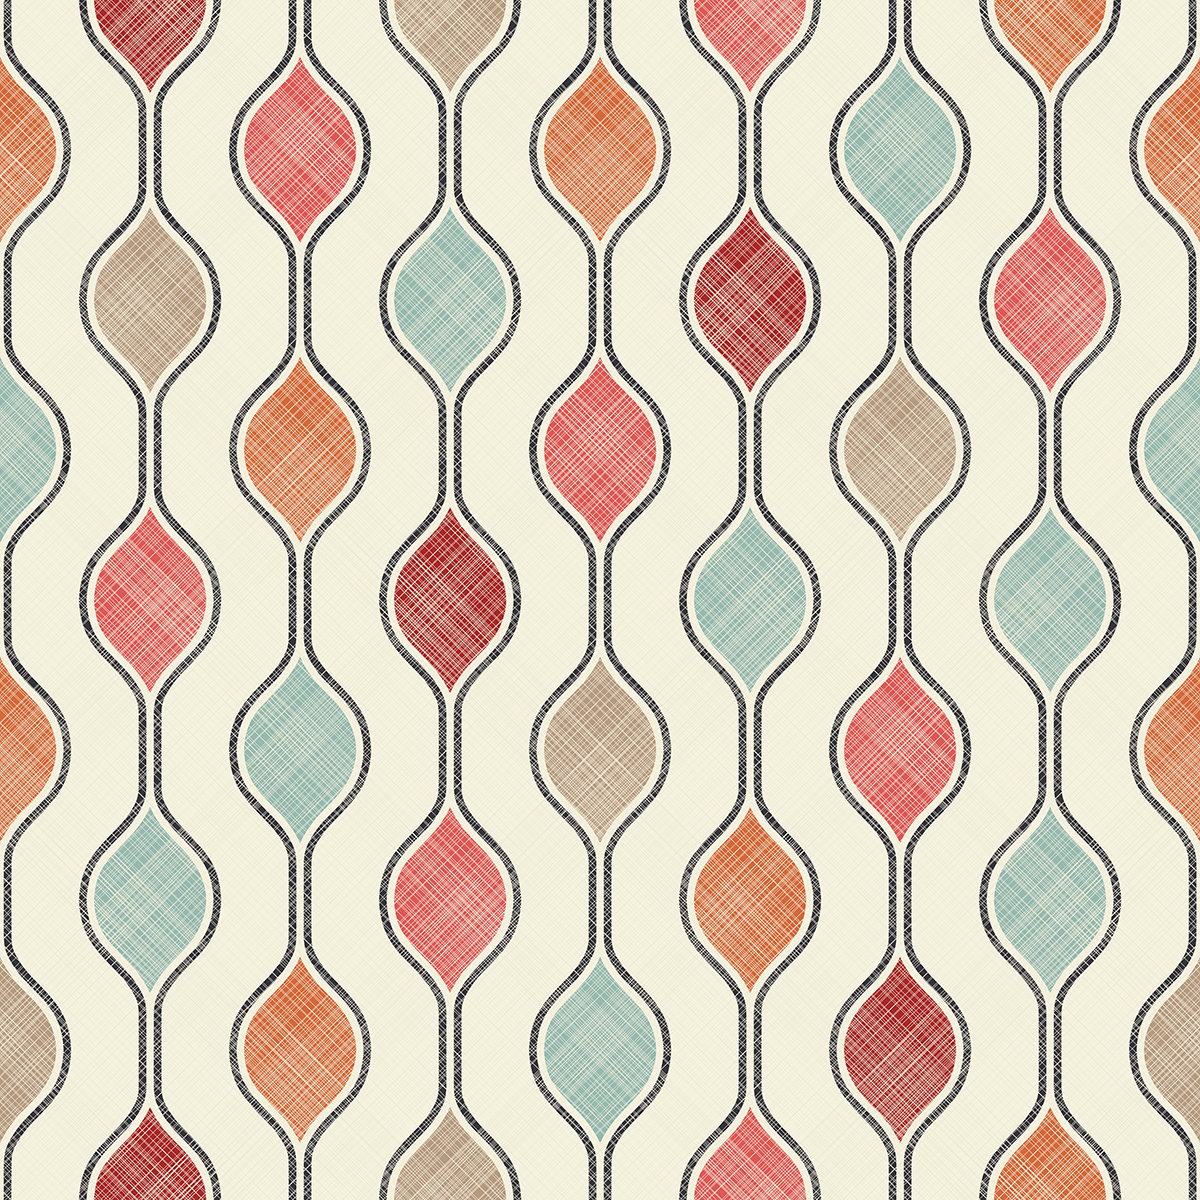 A fabric texture with colorful shapes